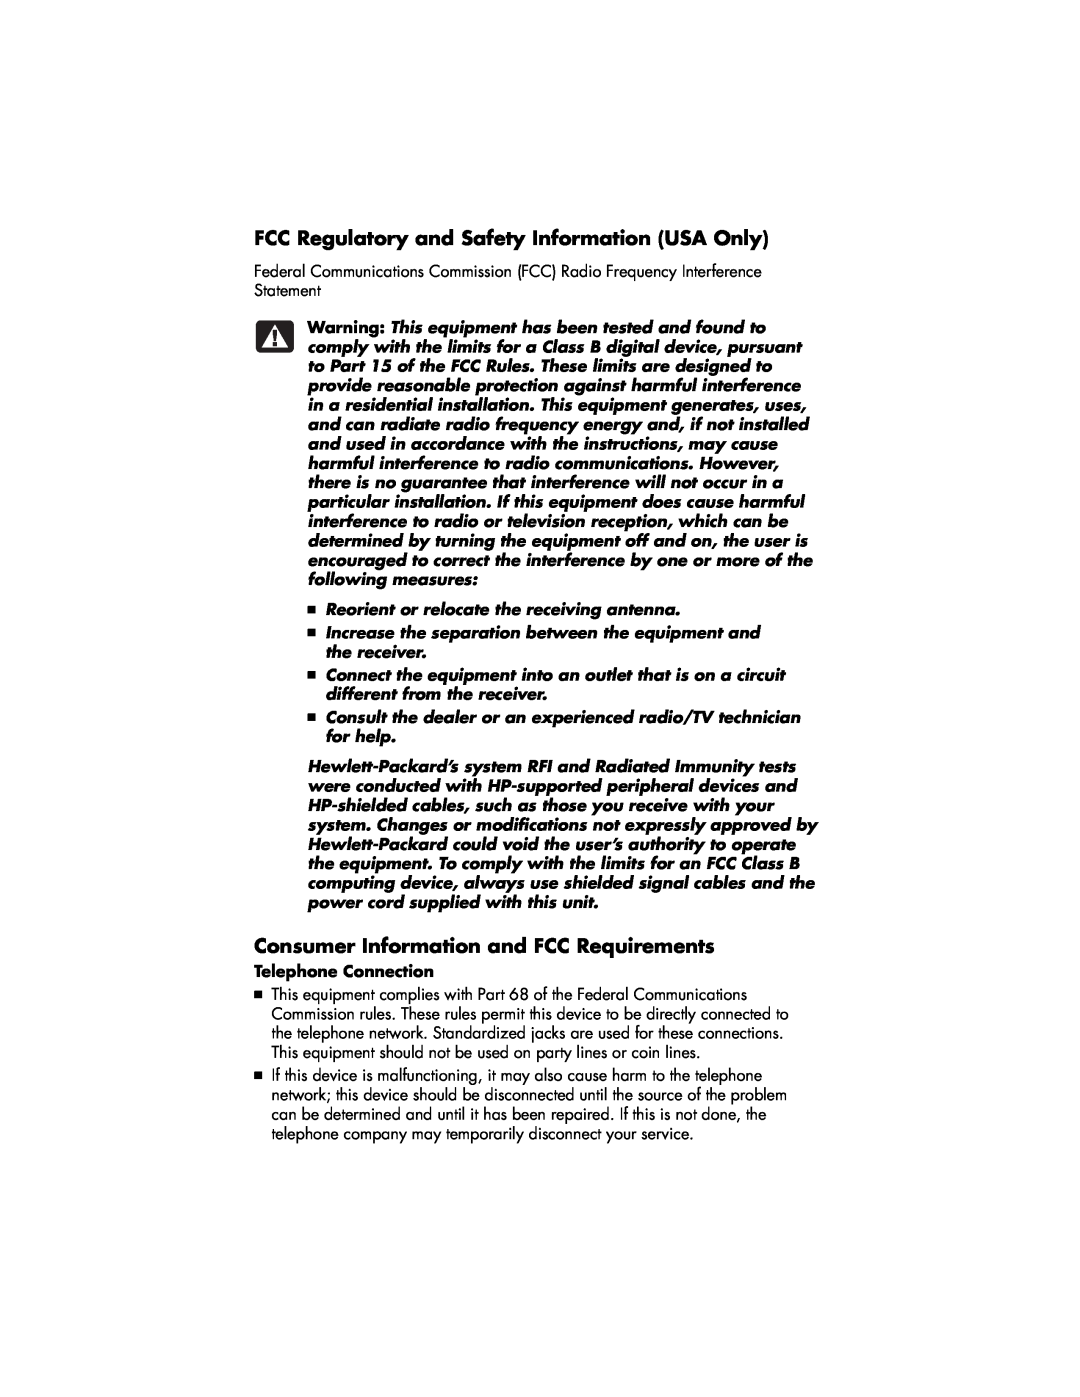 HP 545x (US/CAN), 735n (US/CAN) FCC Regulatory and Safety Information USA Only, Consumer Information and FCC Requirements 